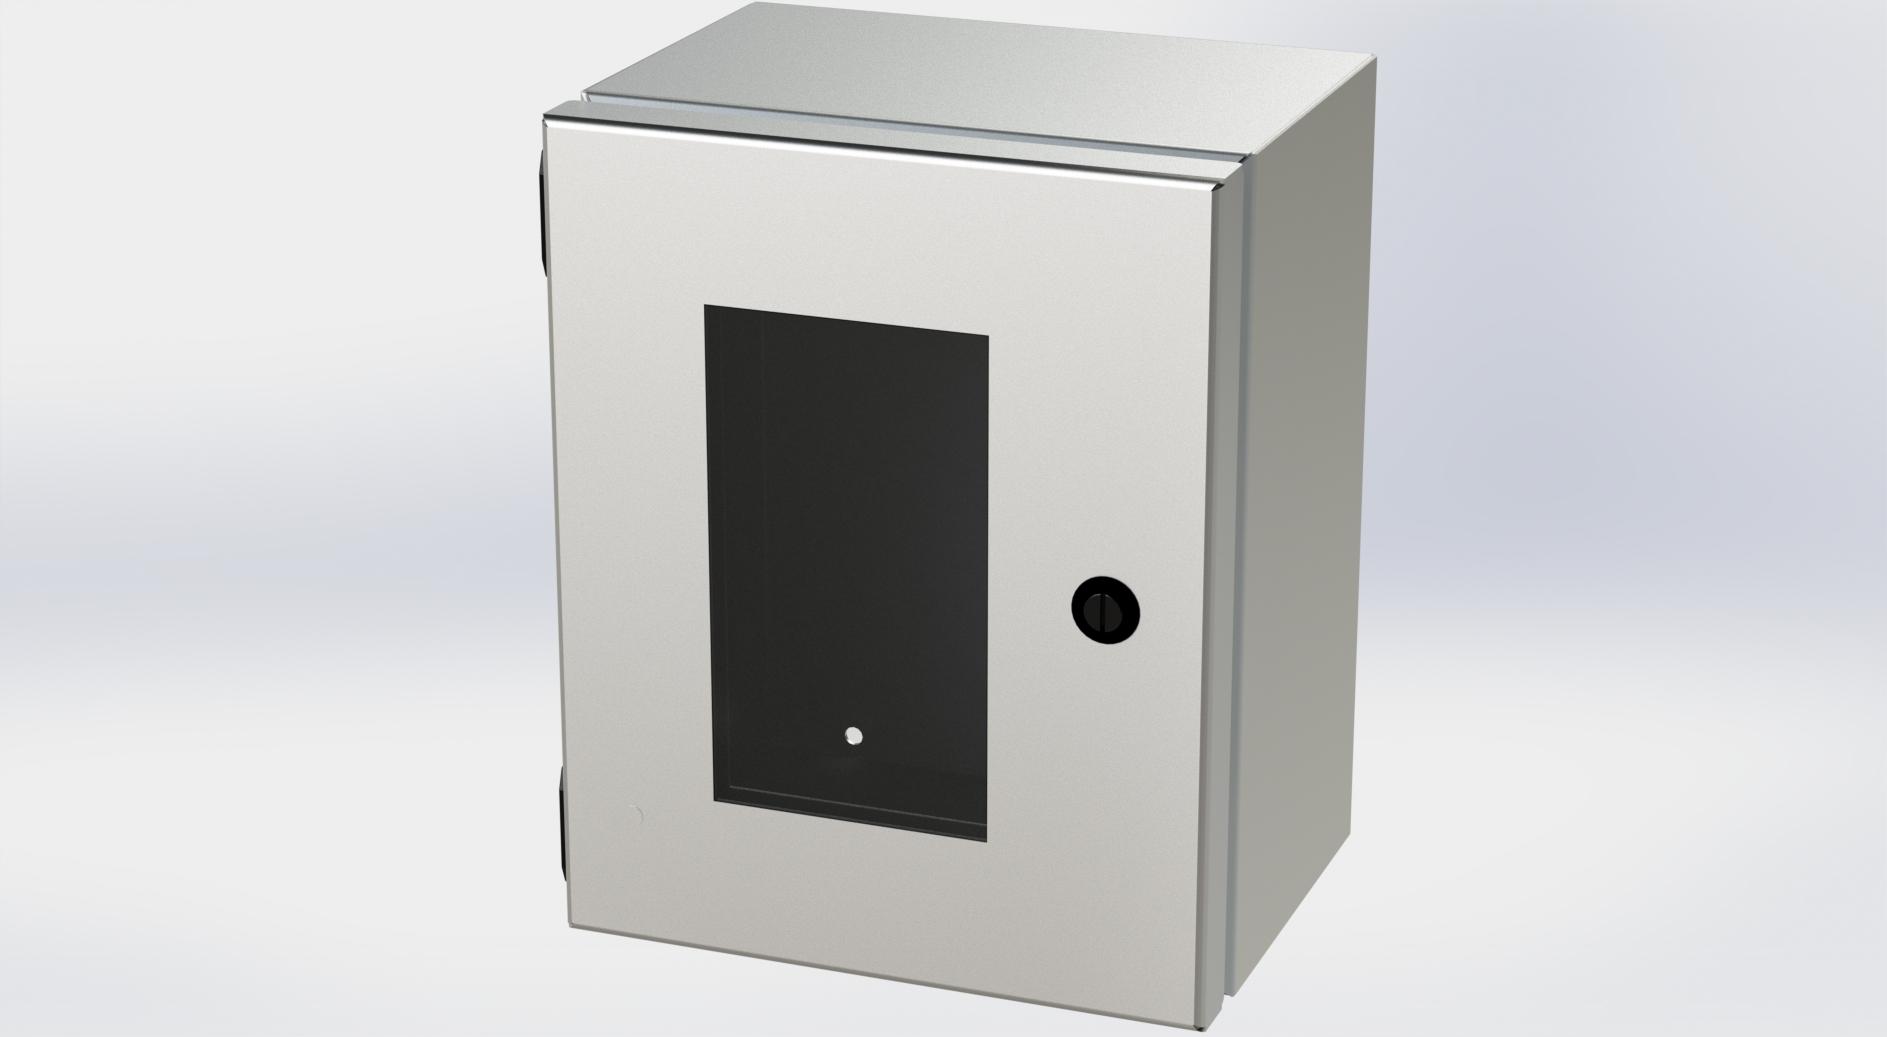 Saginaw Control SCE-10086ELJWSS6 S.S. ELJ Enclosure W/Viewing Window, Height:10.00", Width:8.00", Depth:6.00", #4 brushed finish on all exterior surfaces. Optional panels are powder coated white.